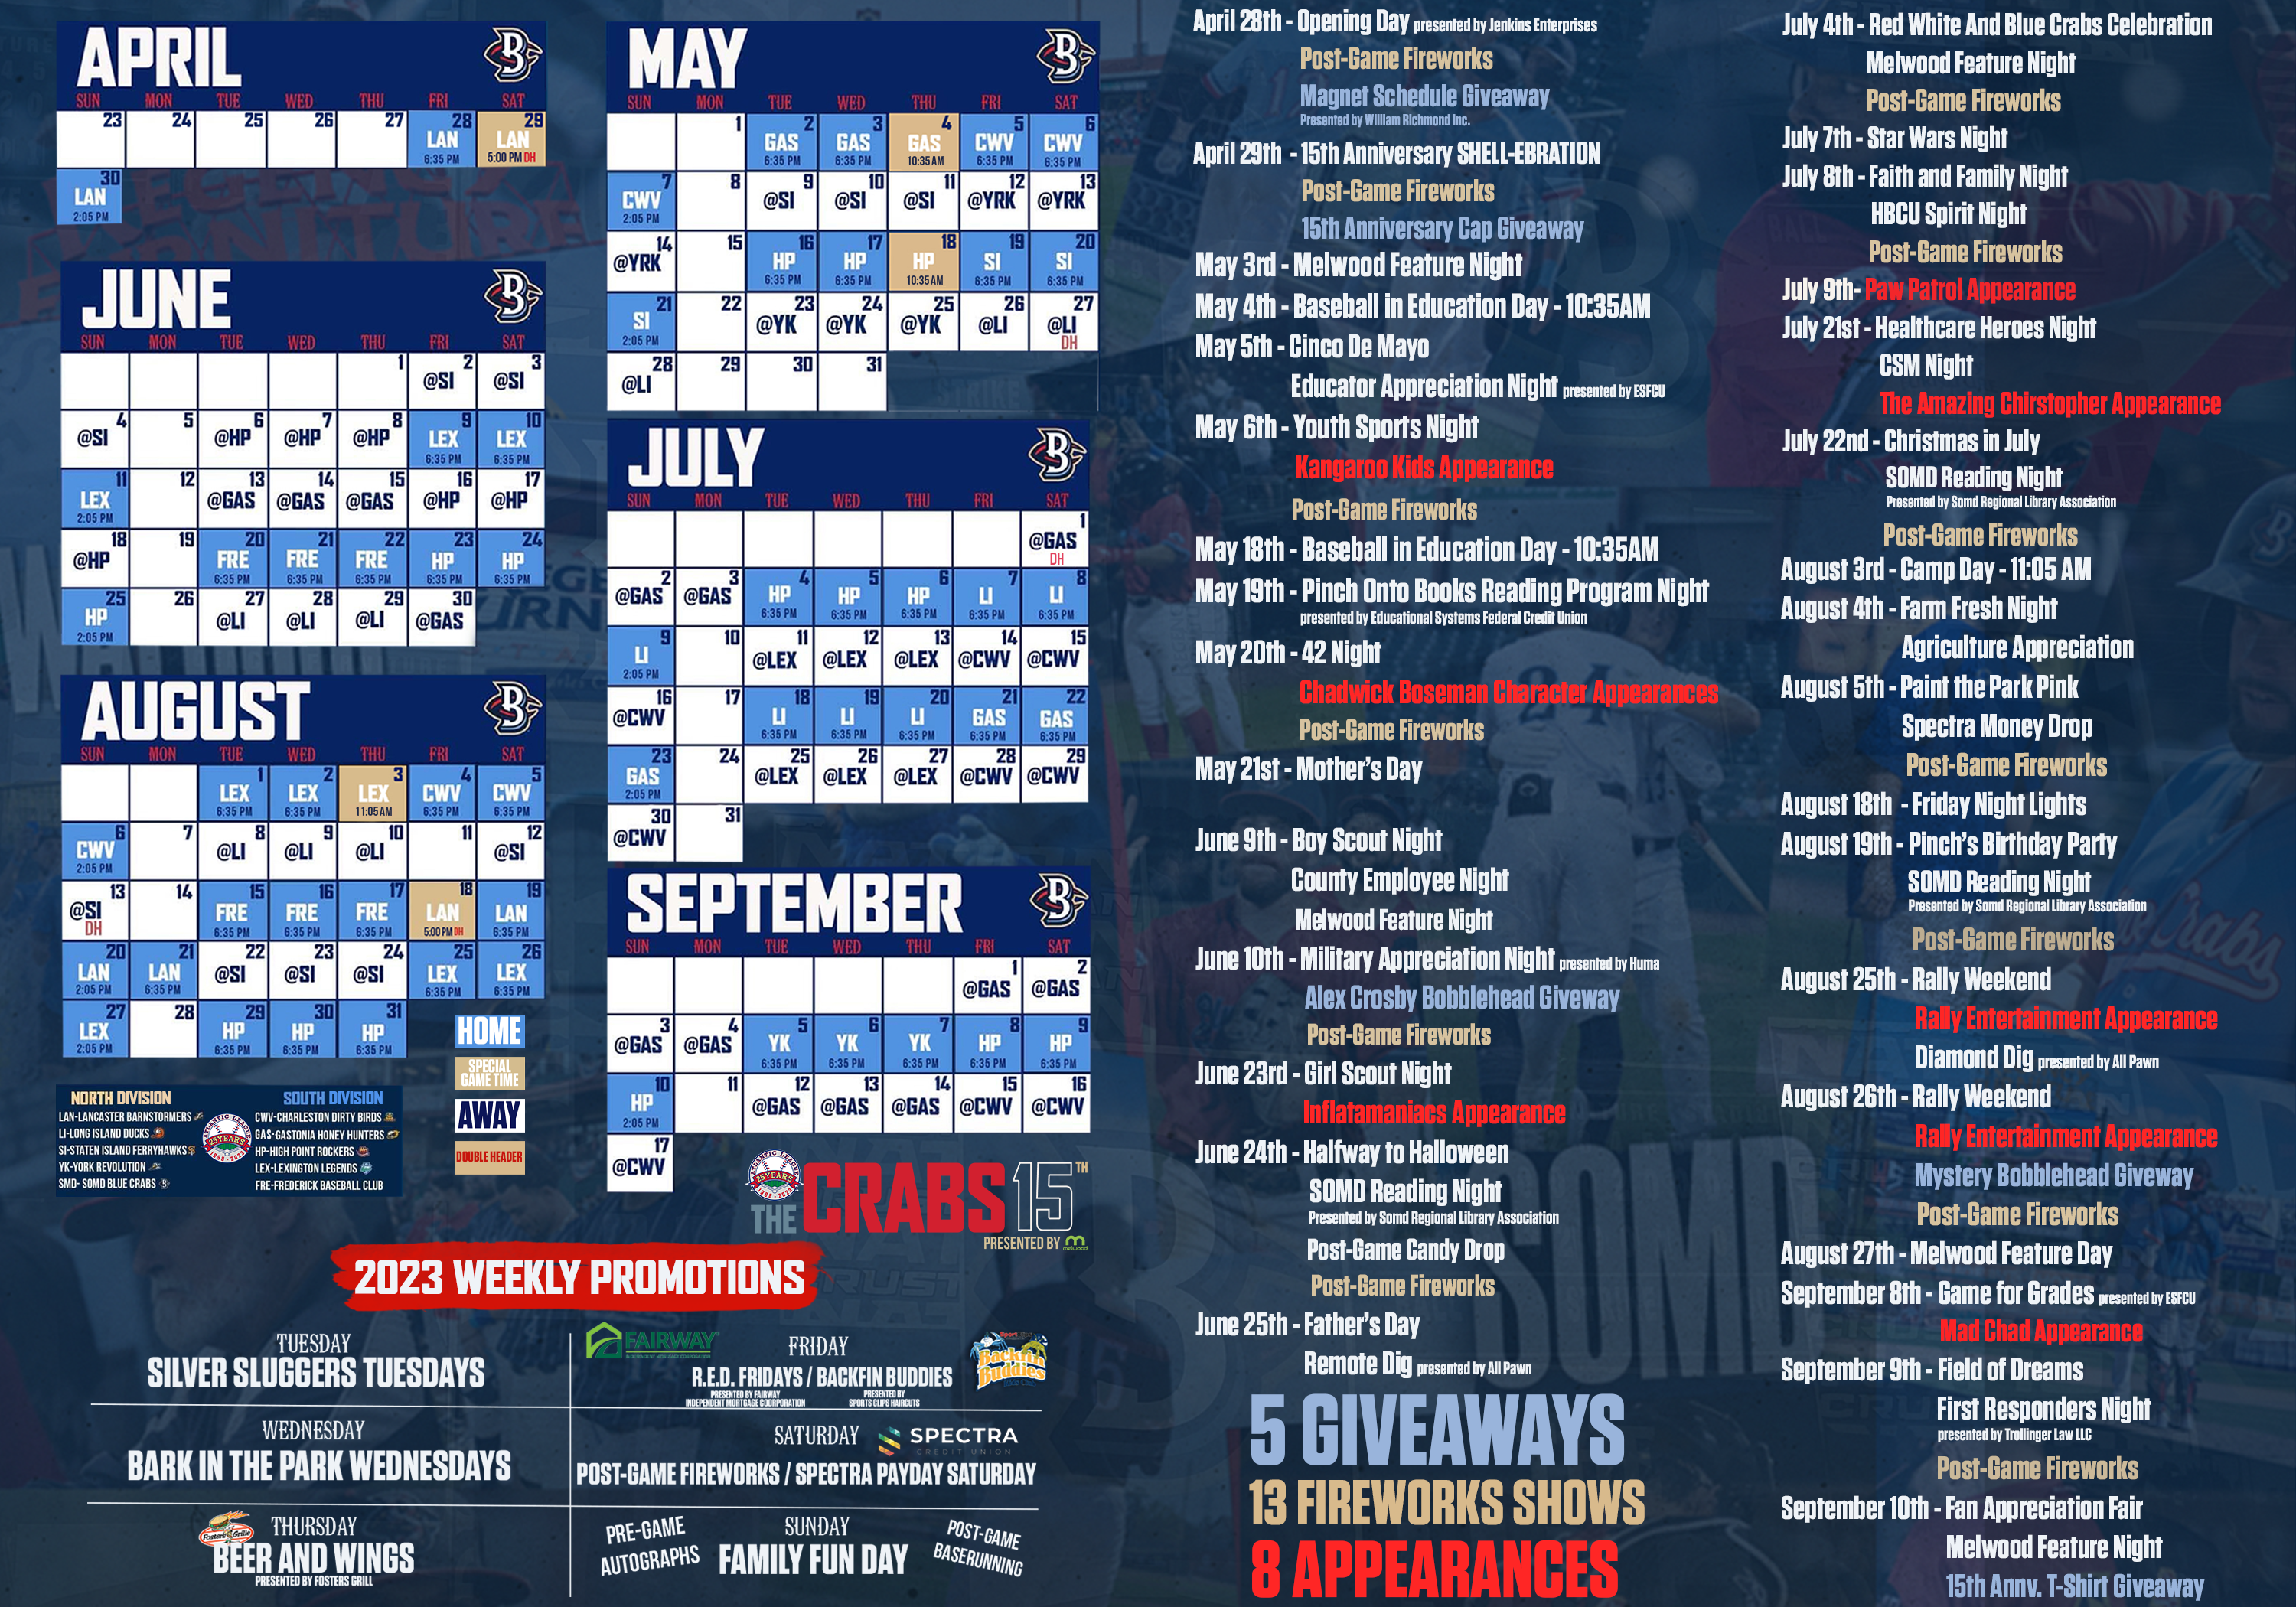 Texas Rangers Promotions Schedule Announced for 2020 Season